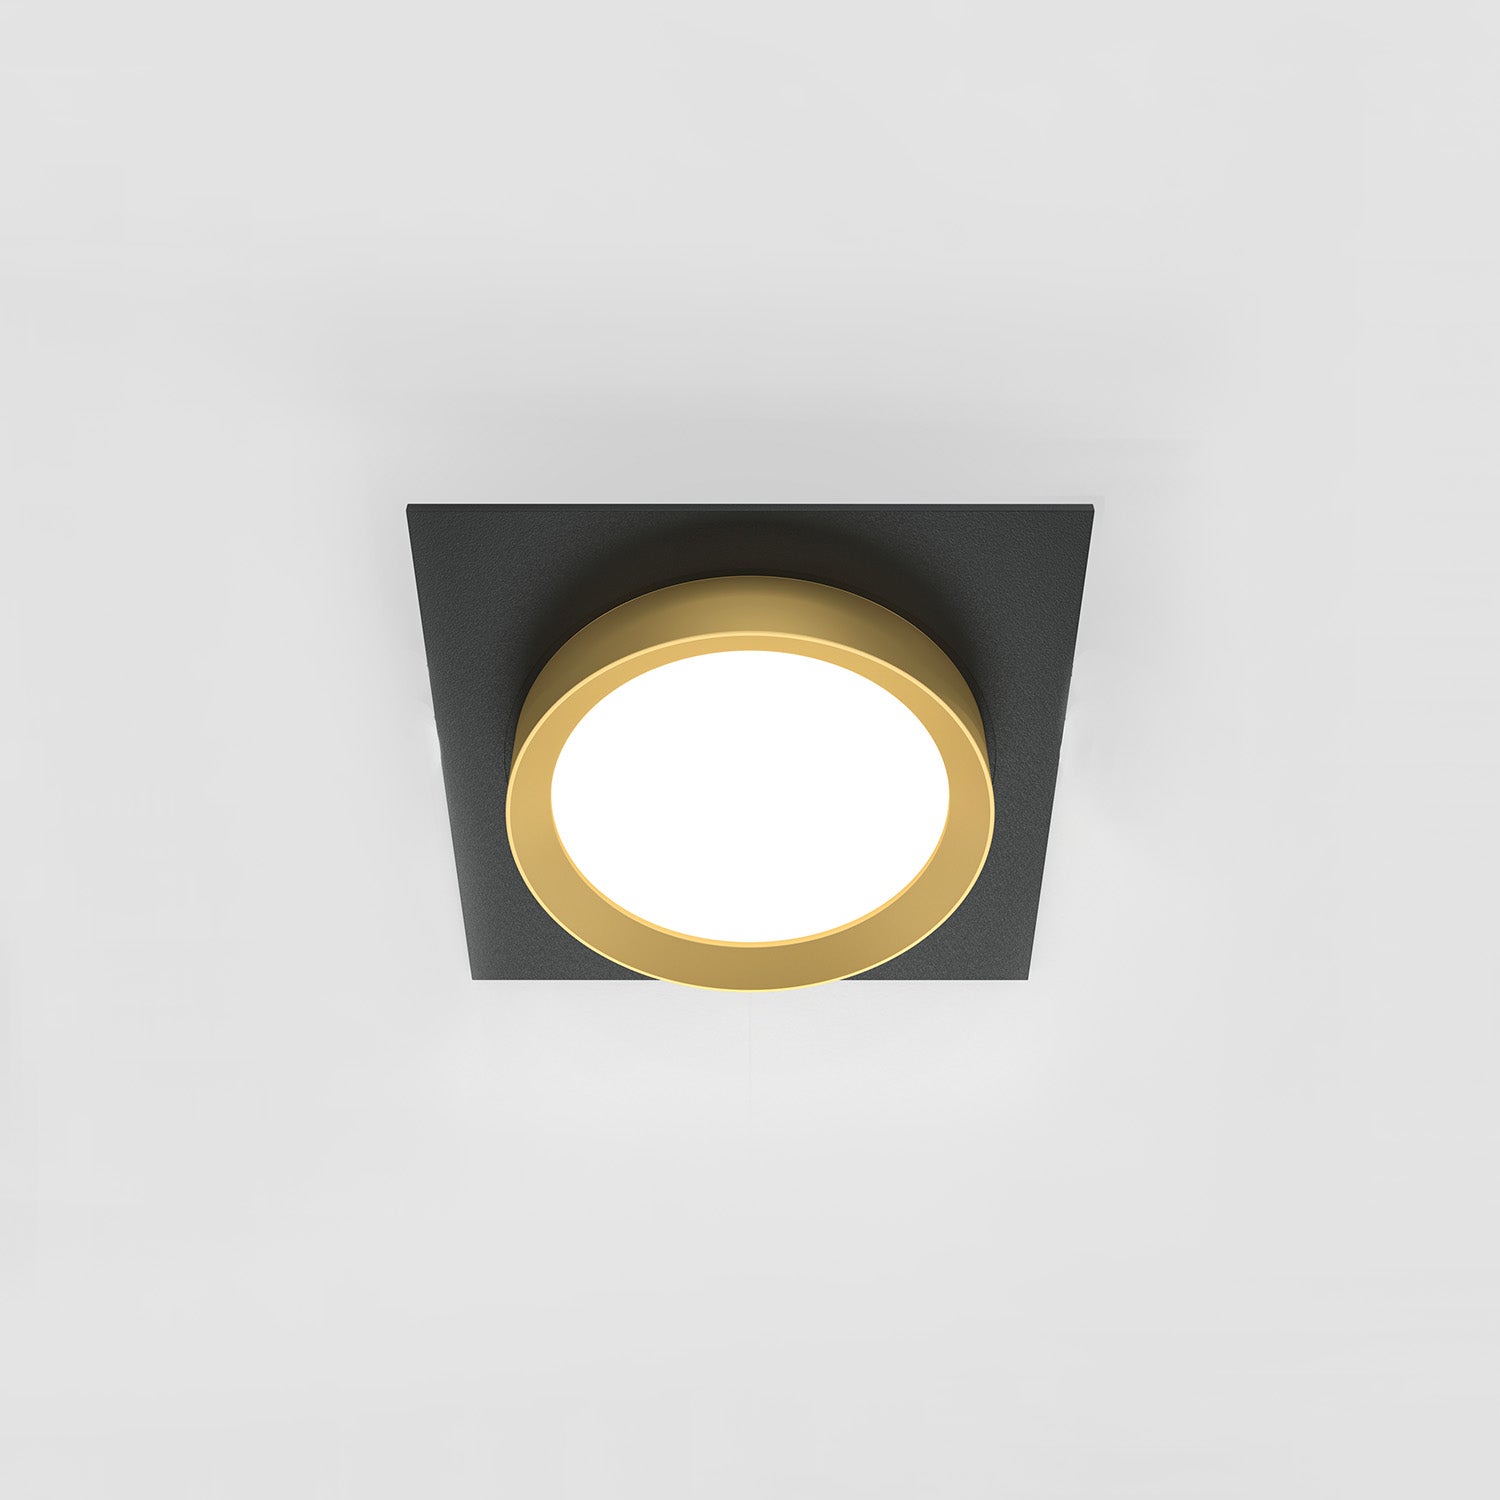 HOOP - Design and modern square and round spotlight 110mm